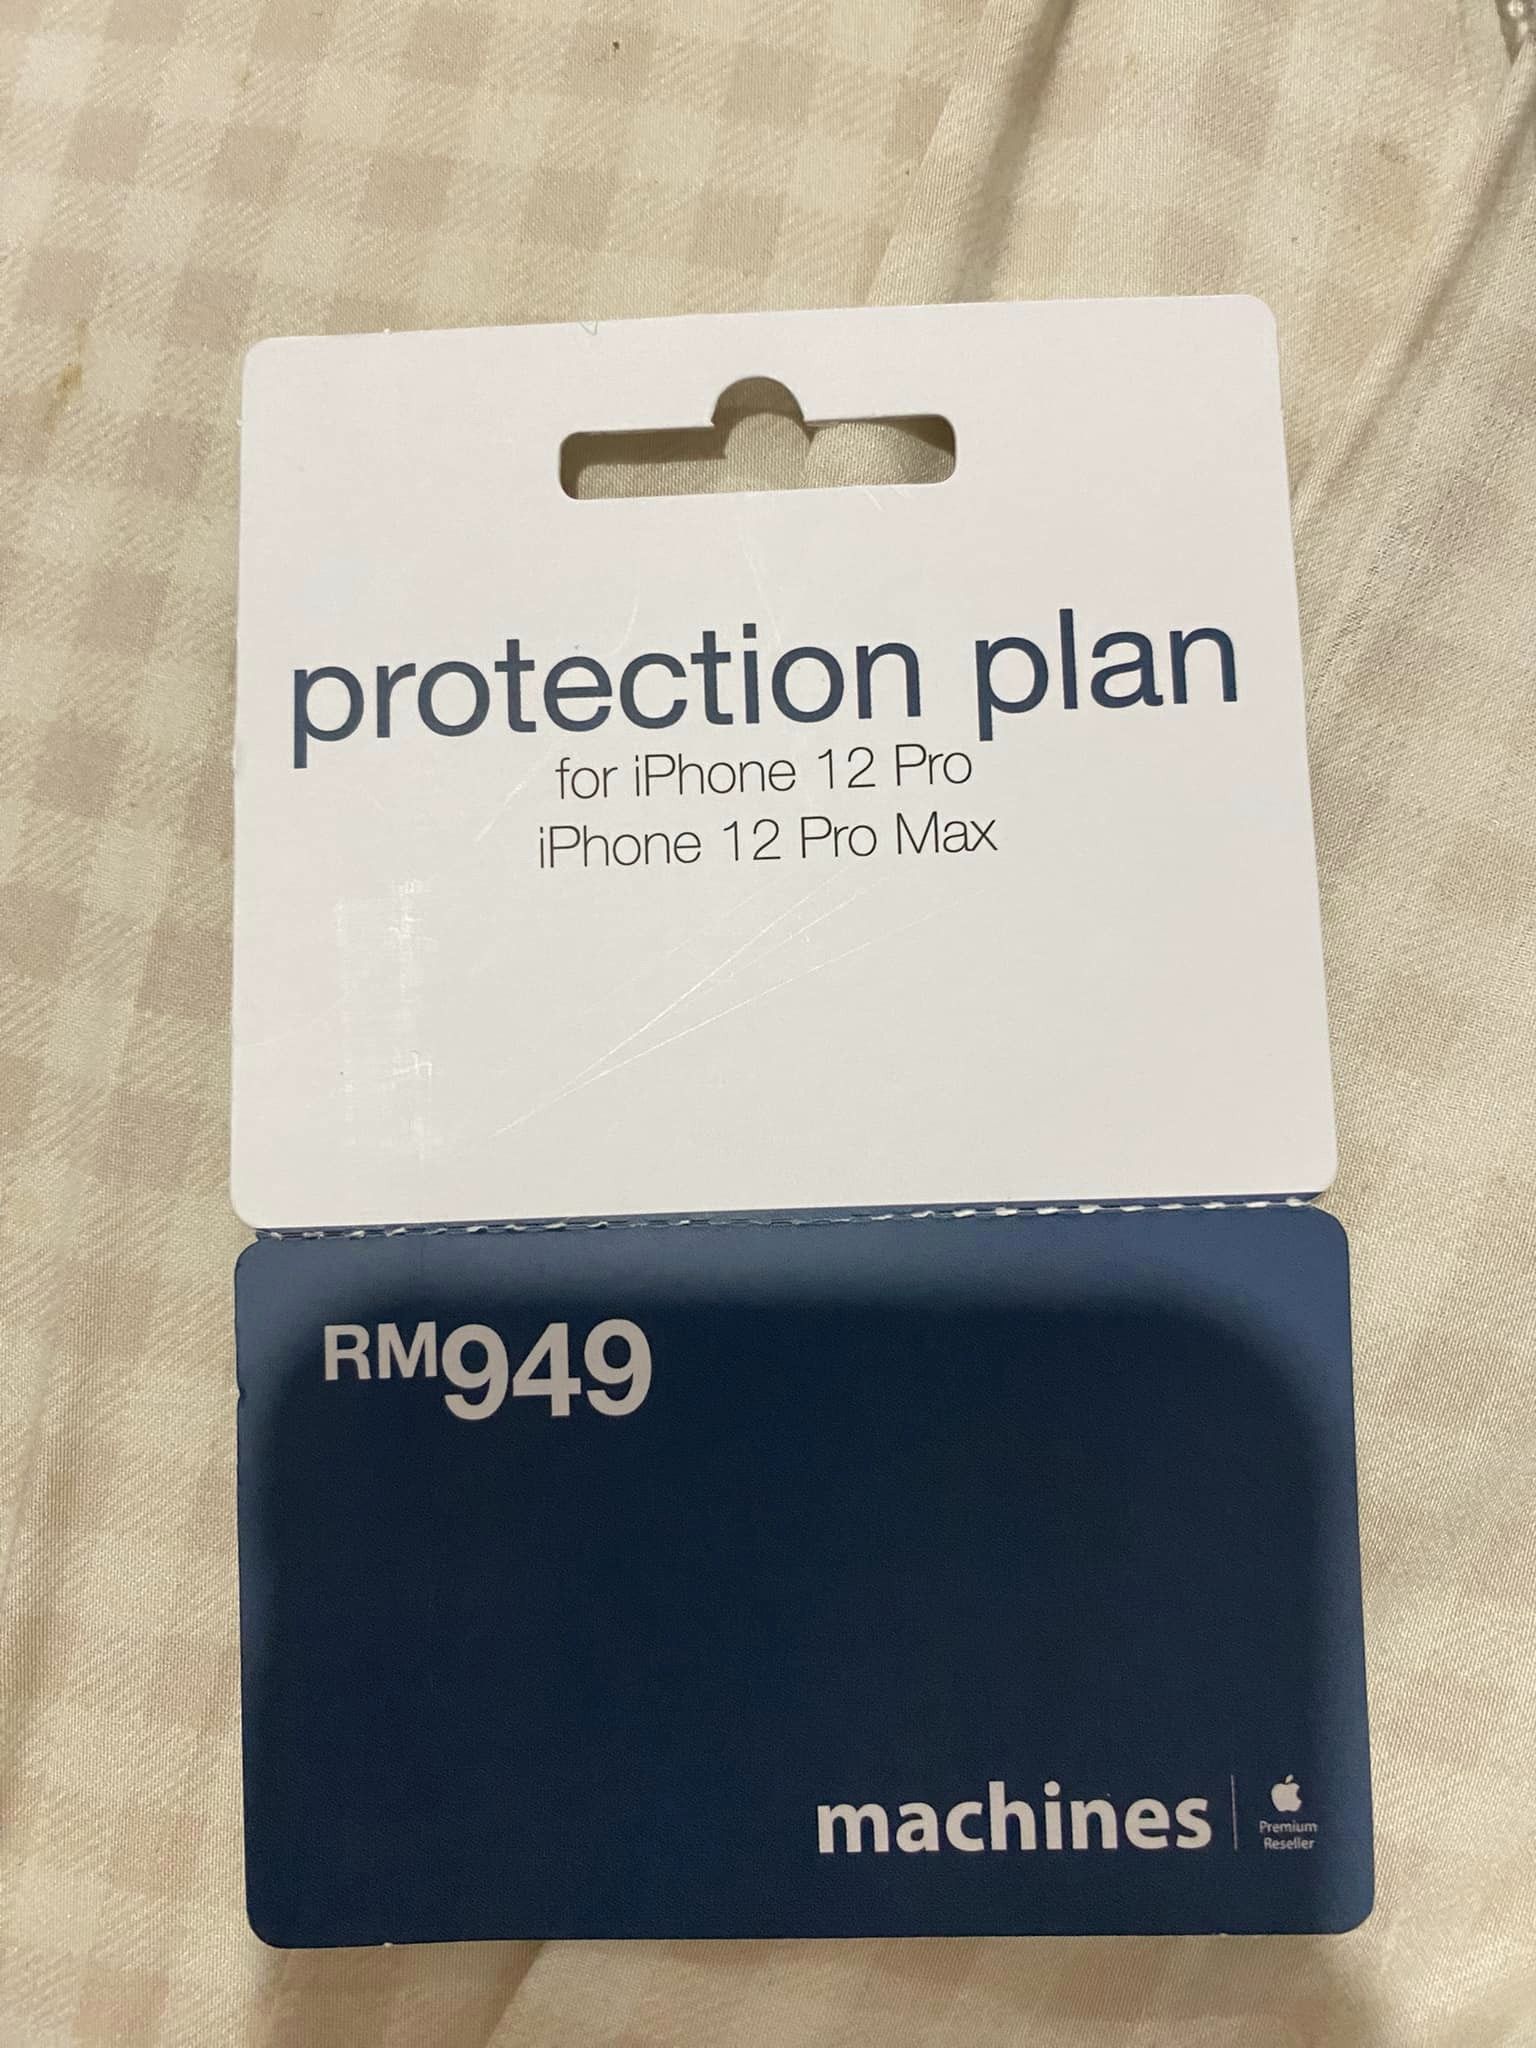 The protection plan offered by the reseller. Image credit: Kenny Ng